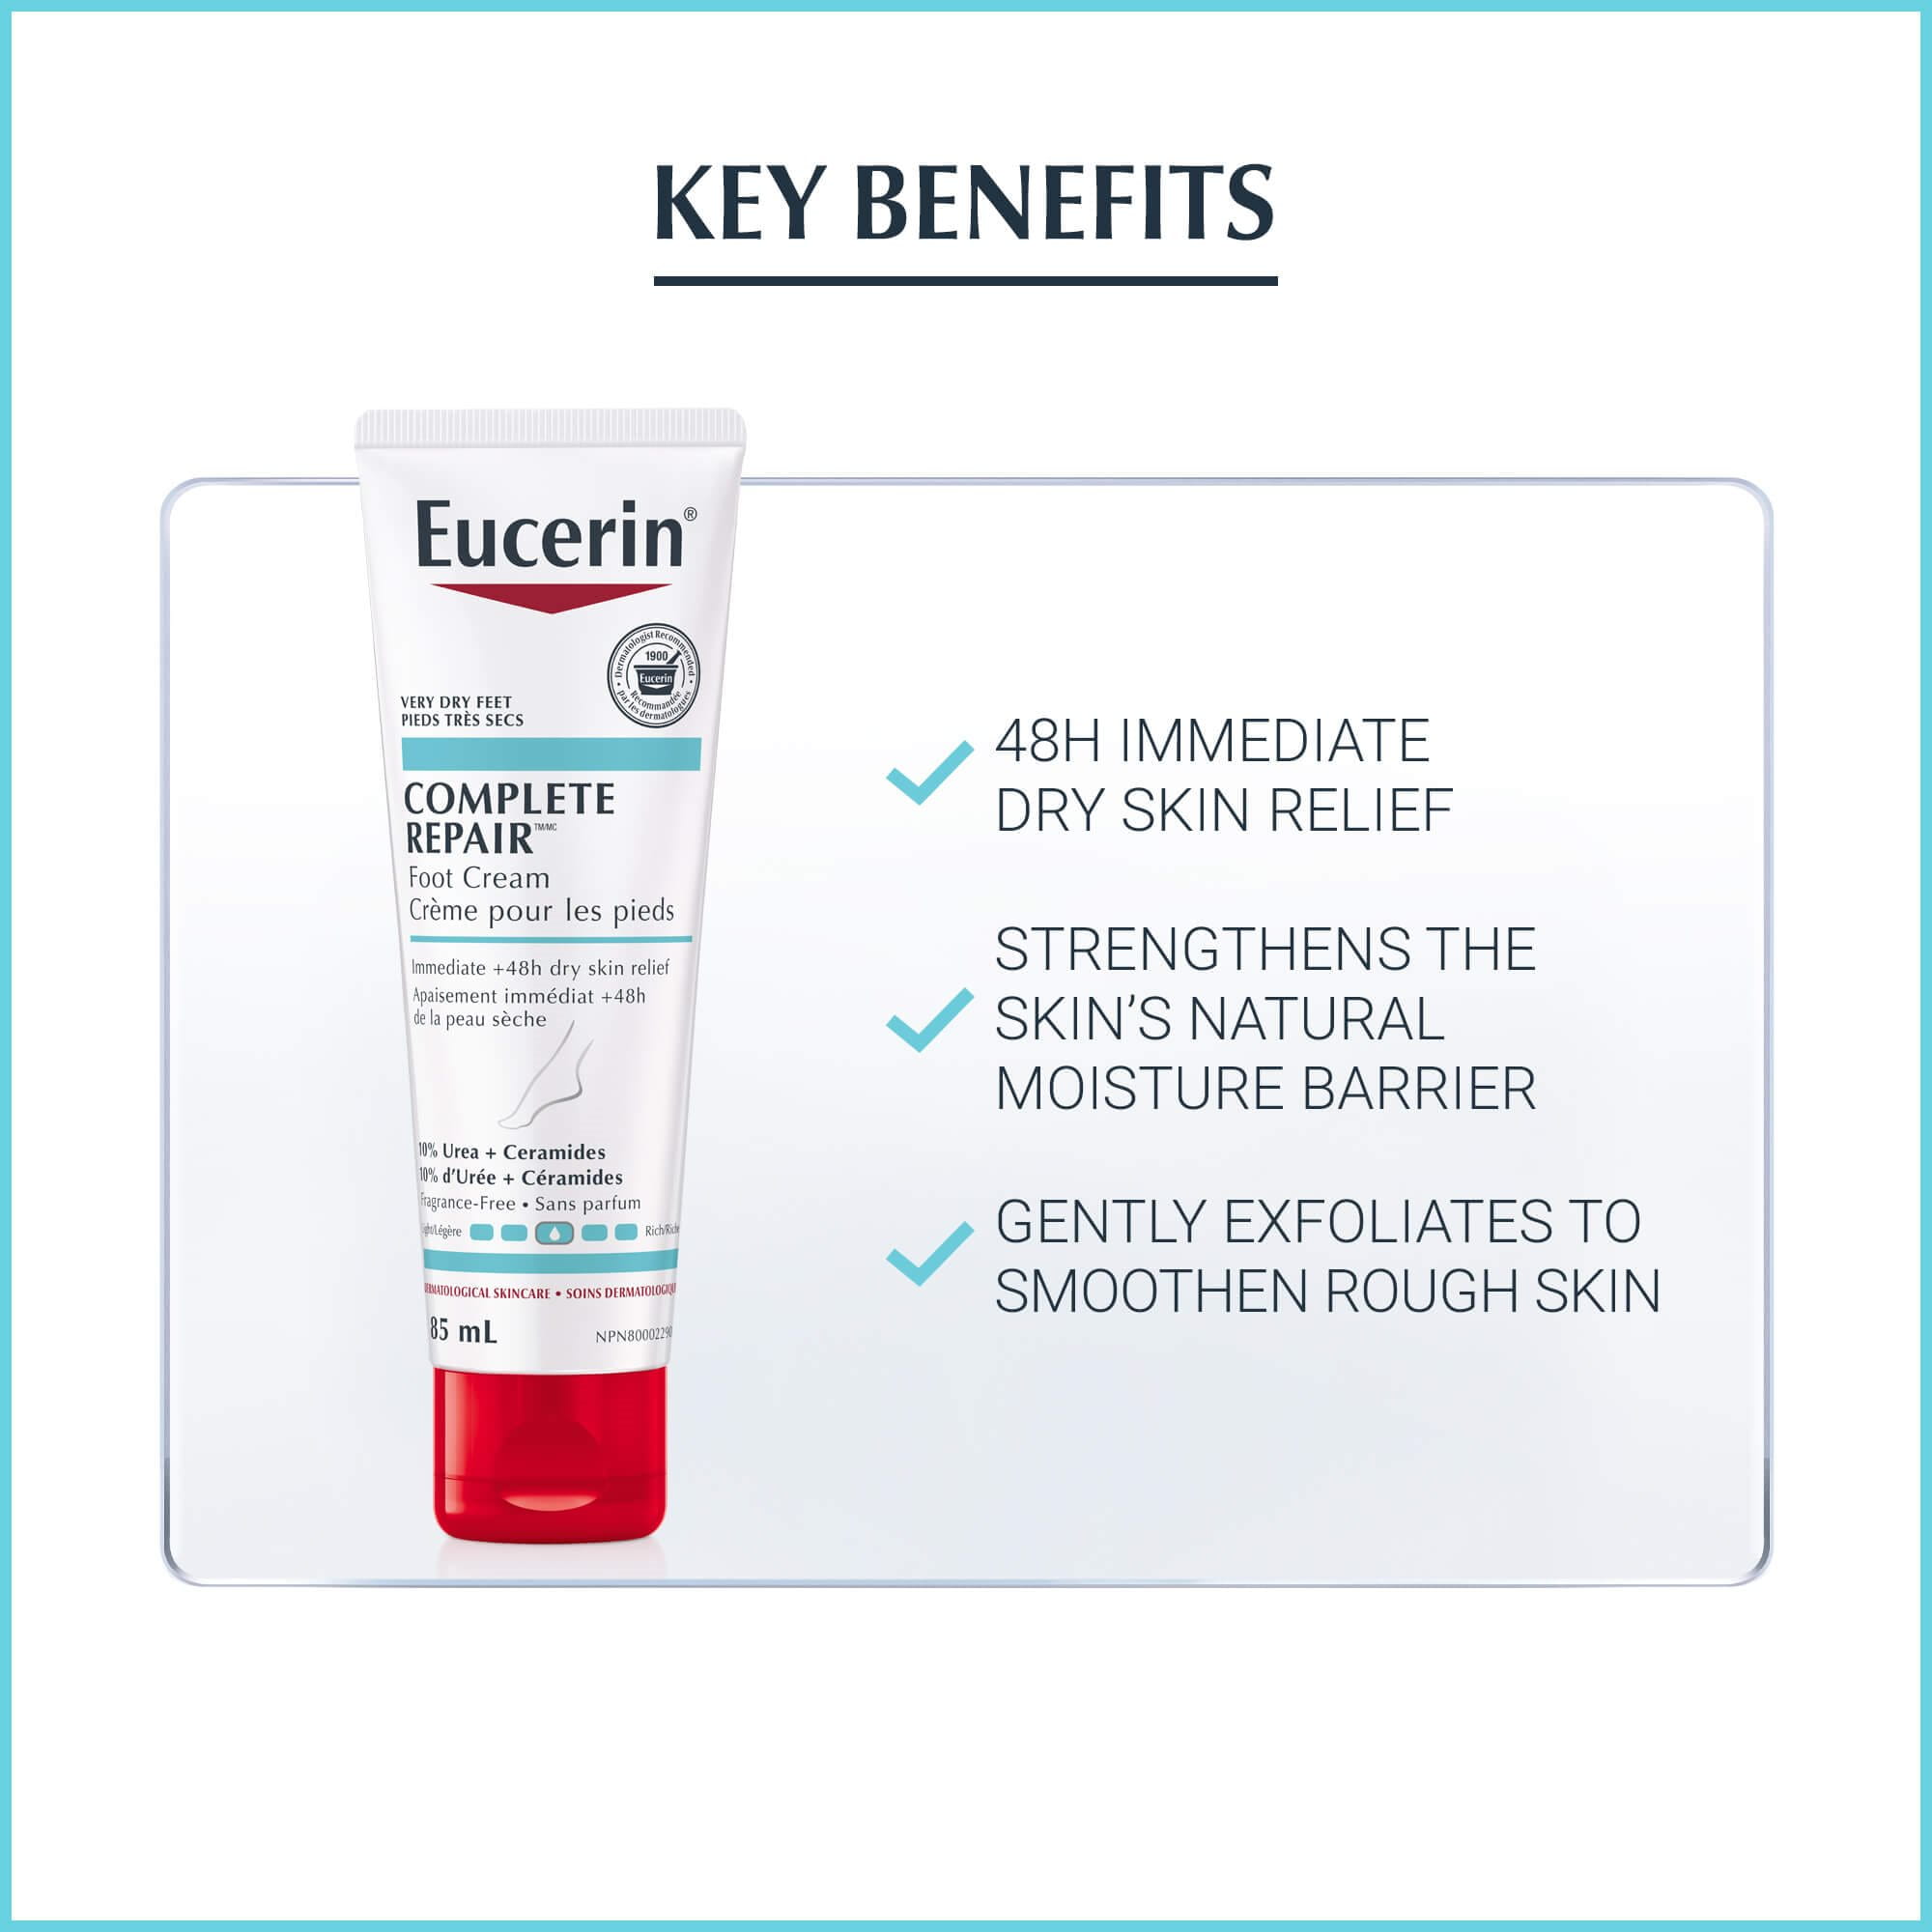 Image listing the key benefits of using Eucerin Complete Repair Foot Cream.